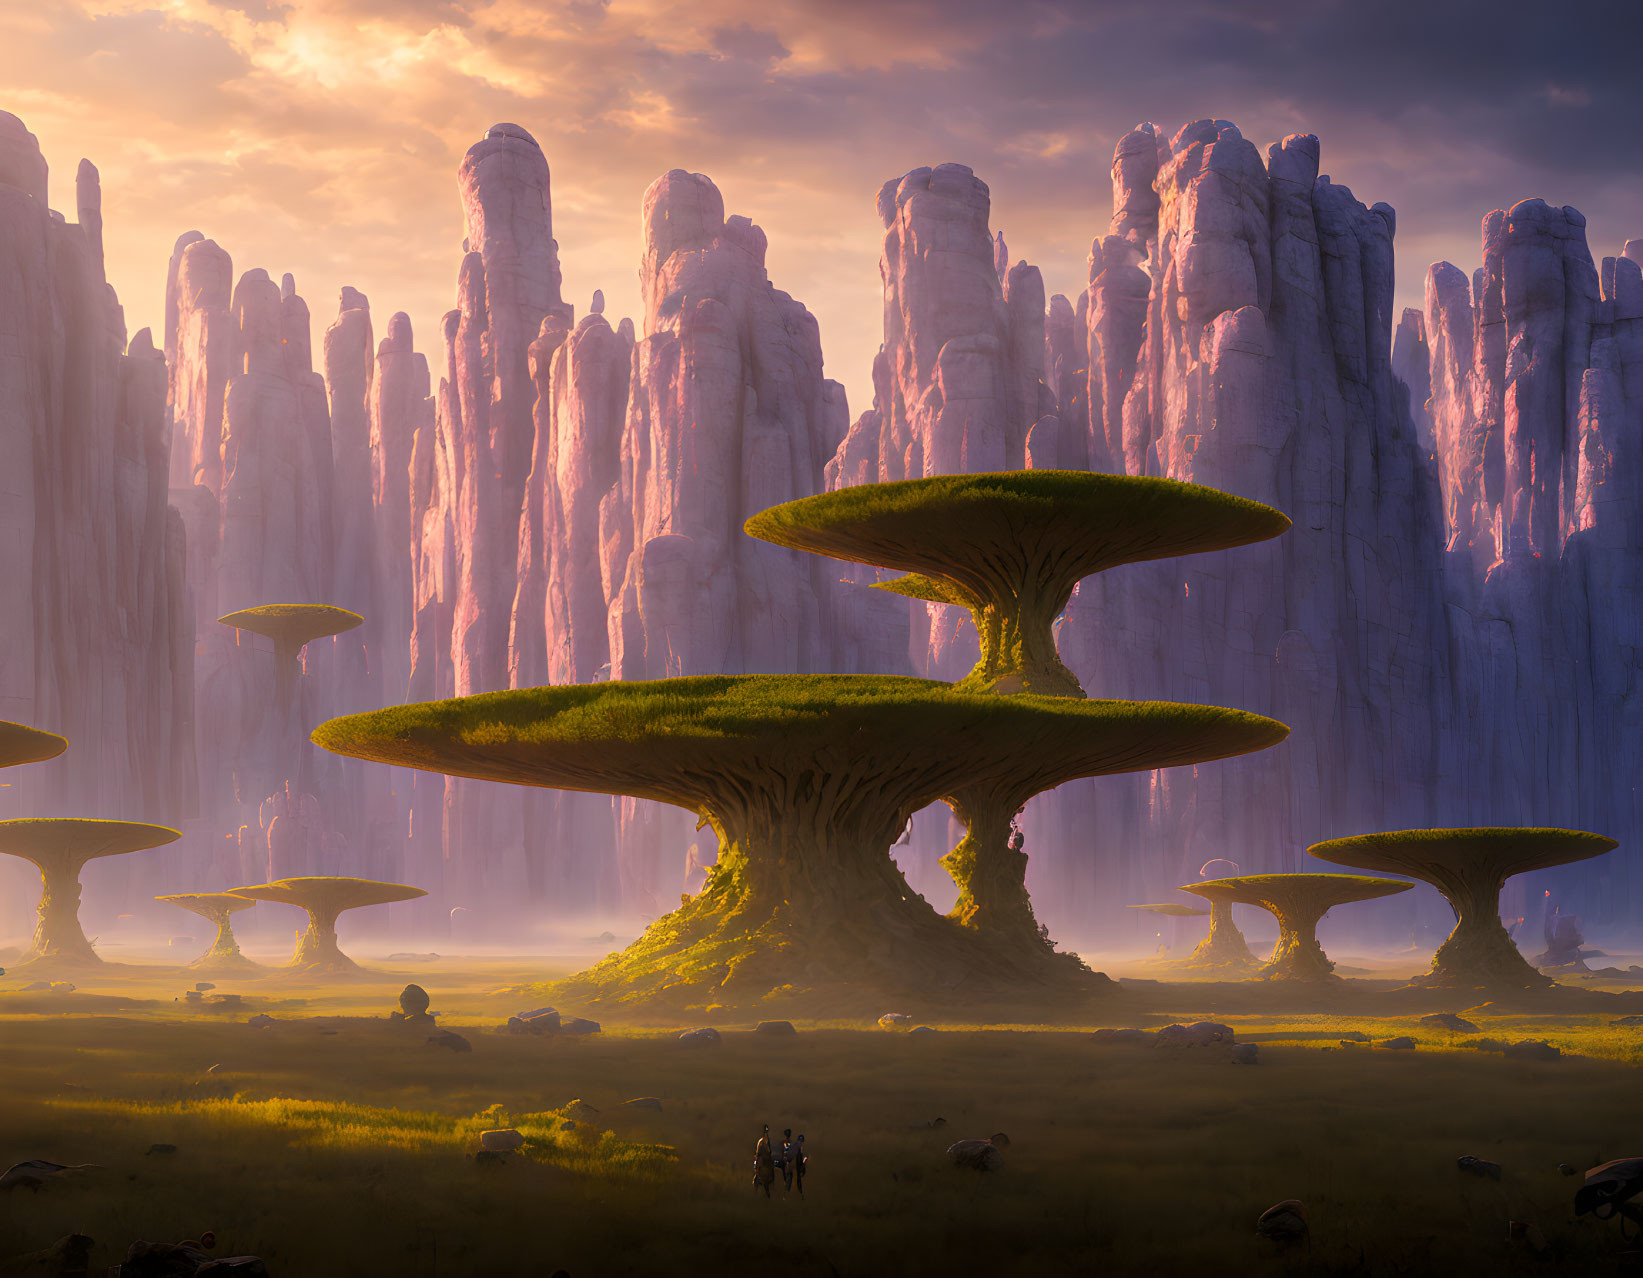 Fantasy landscape with towering rock formations and oversized mushroom-shaped trees